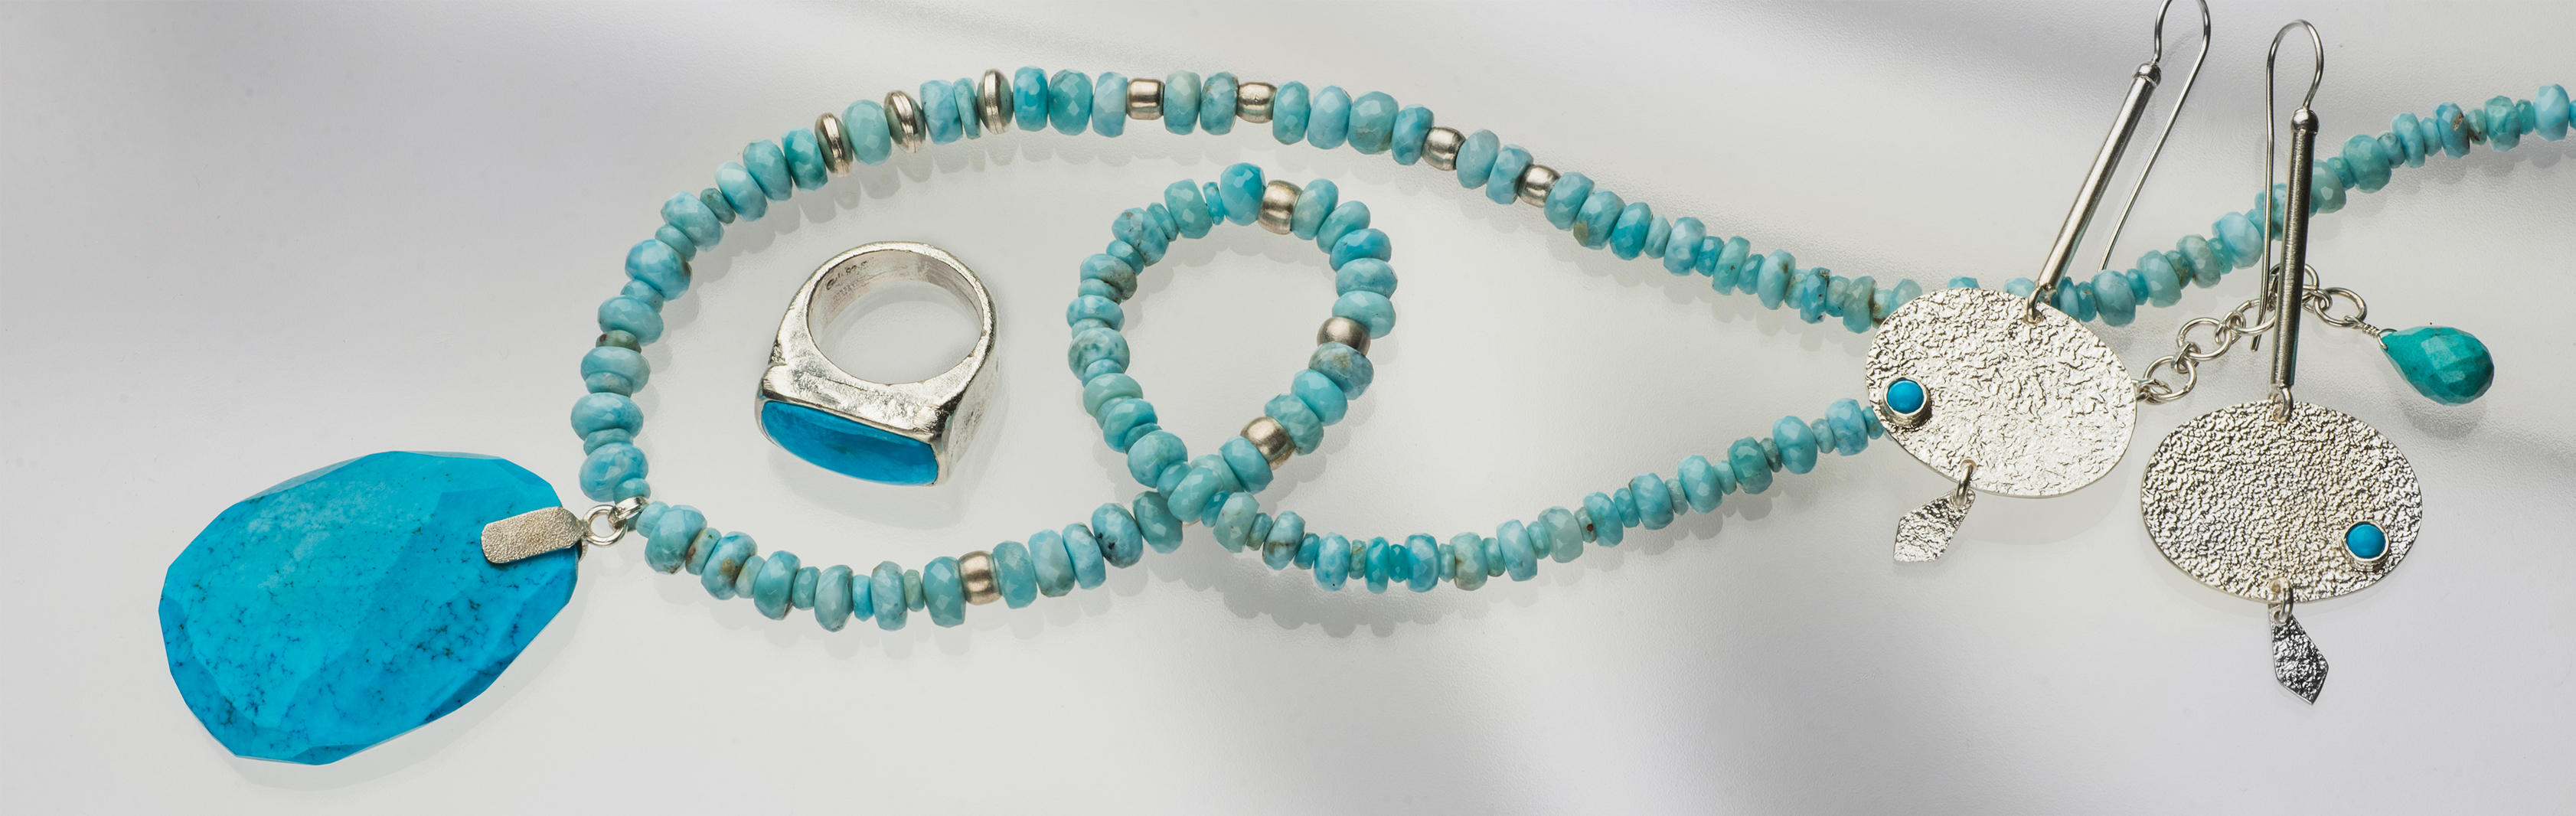 Turquoise Collection | 925 Sterling Silver Jewelry with Turquoise